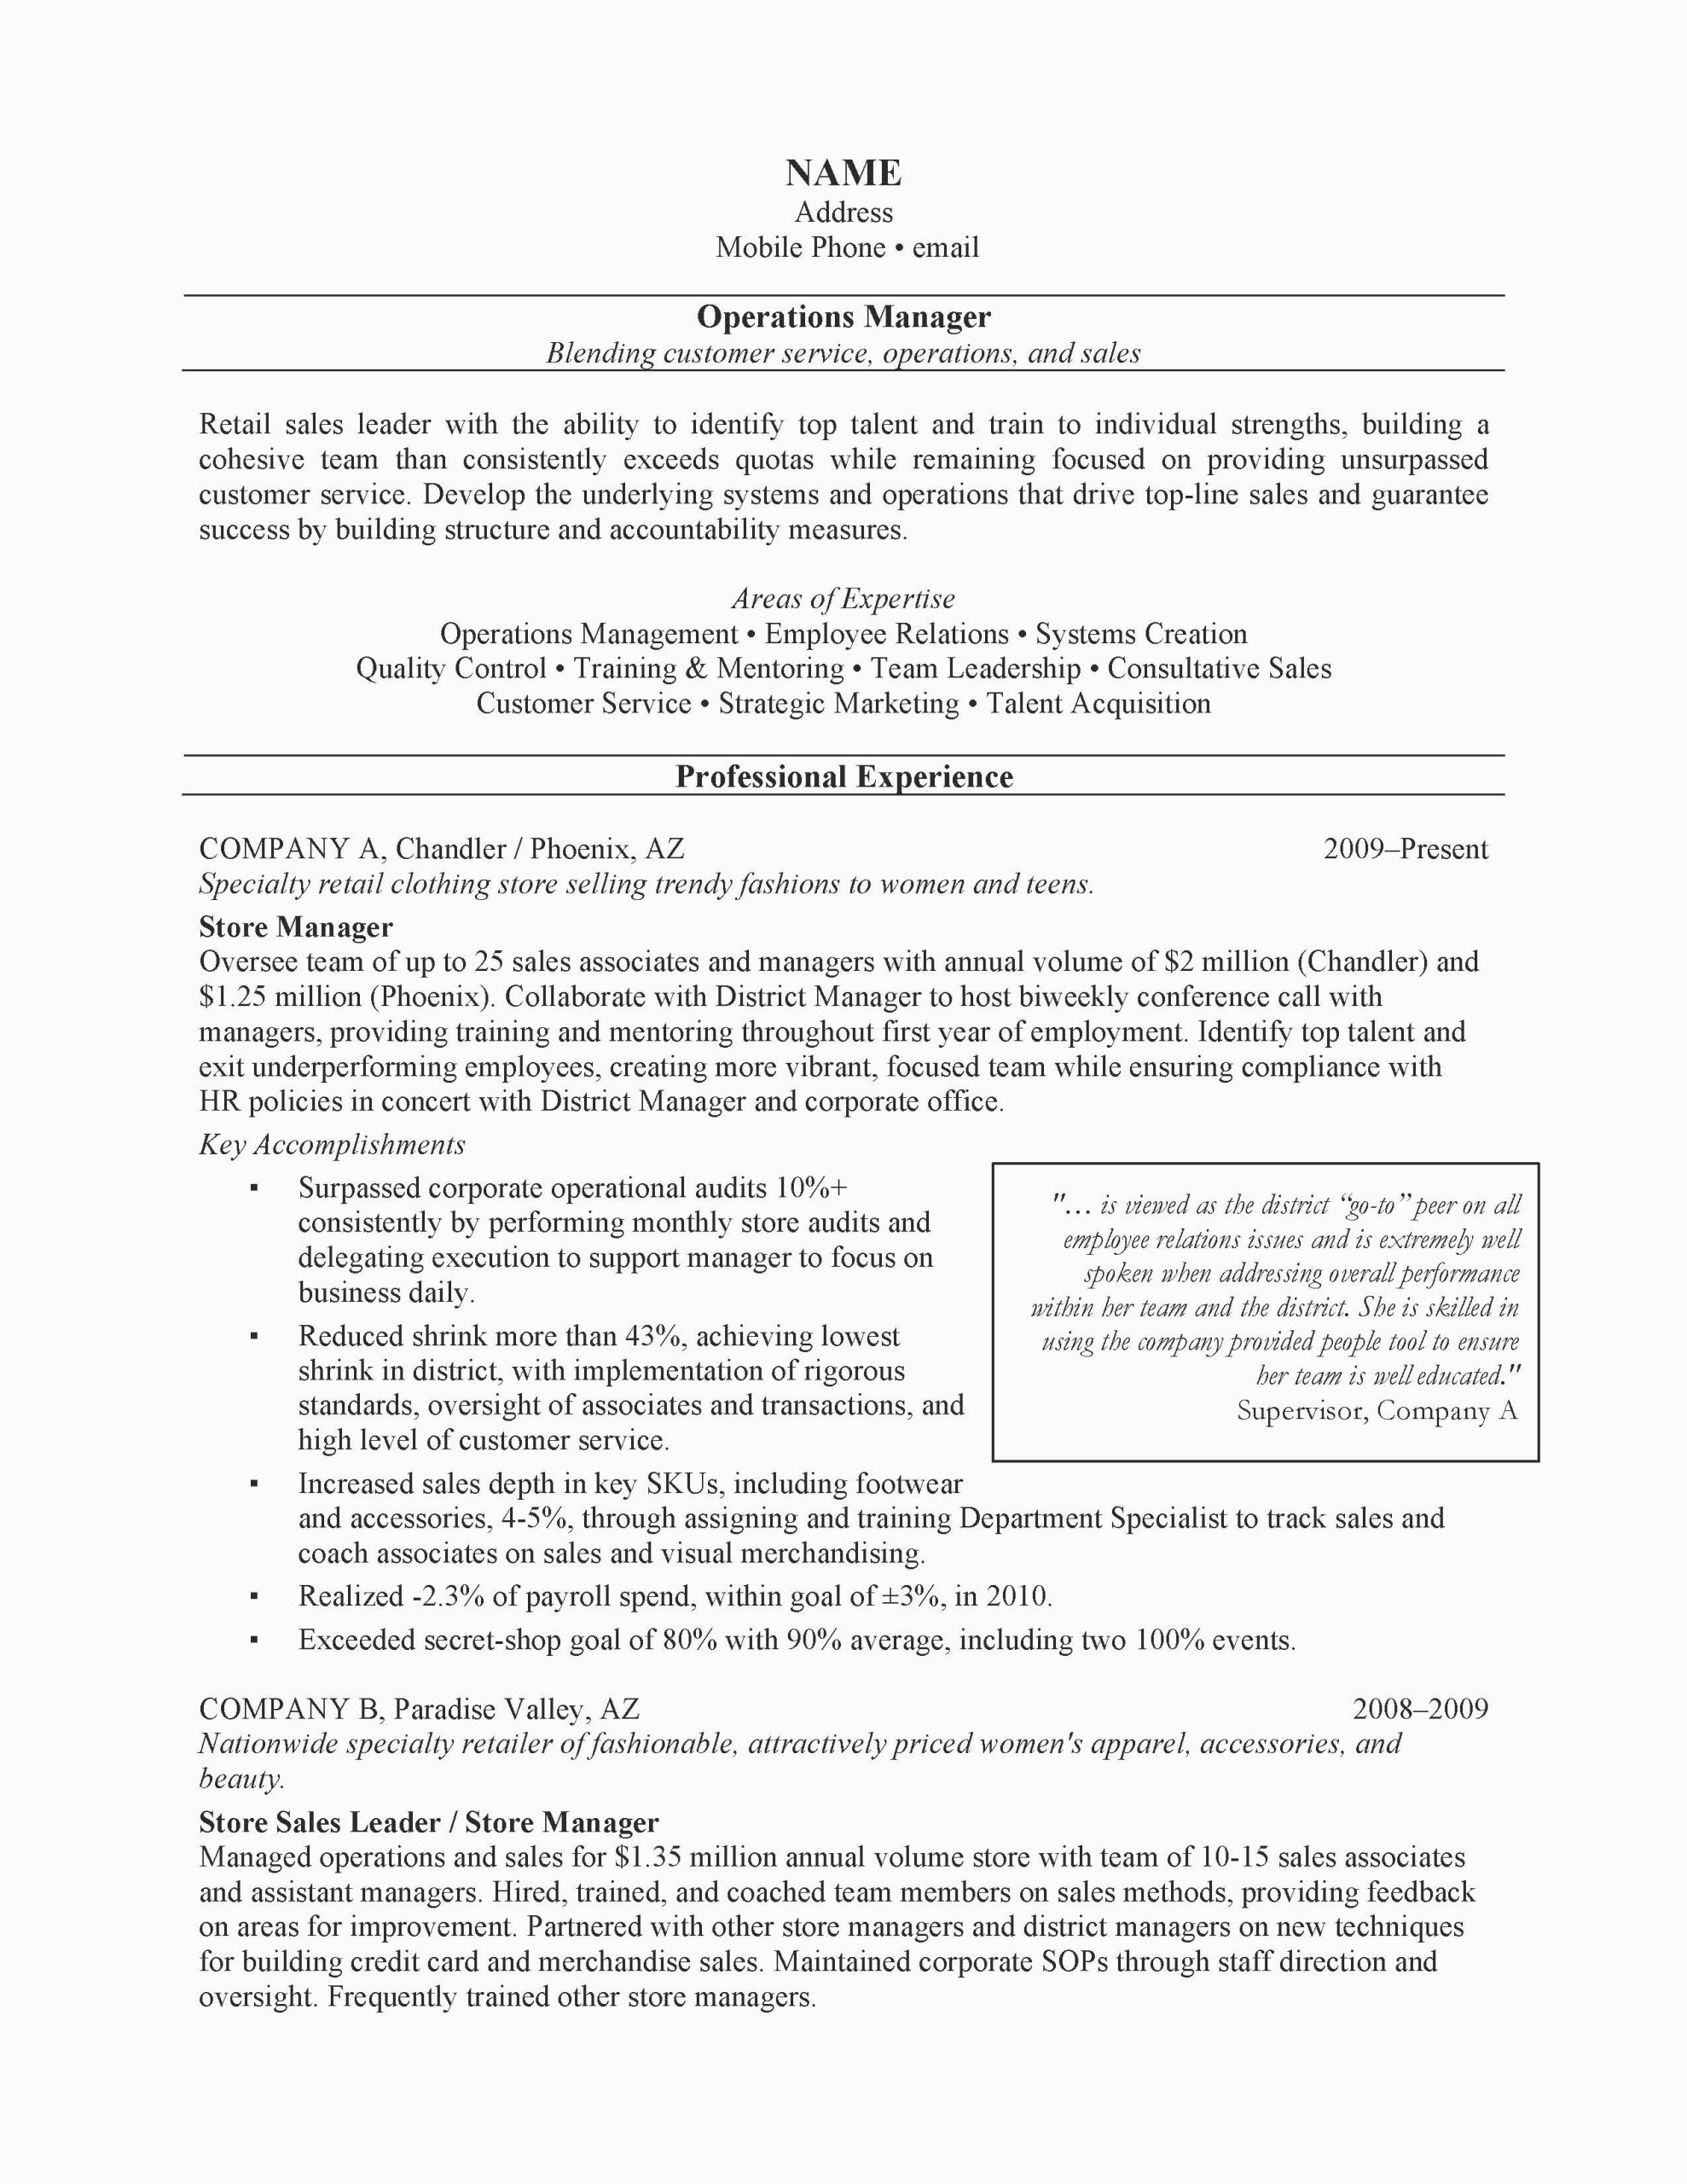 Sample Resume with Achievements Business Operations Ac Plishments are Key to Not Ly A Great Resume but the Entire Job